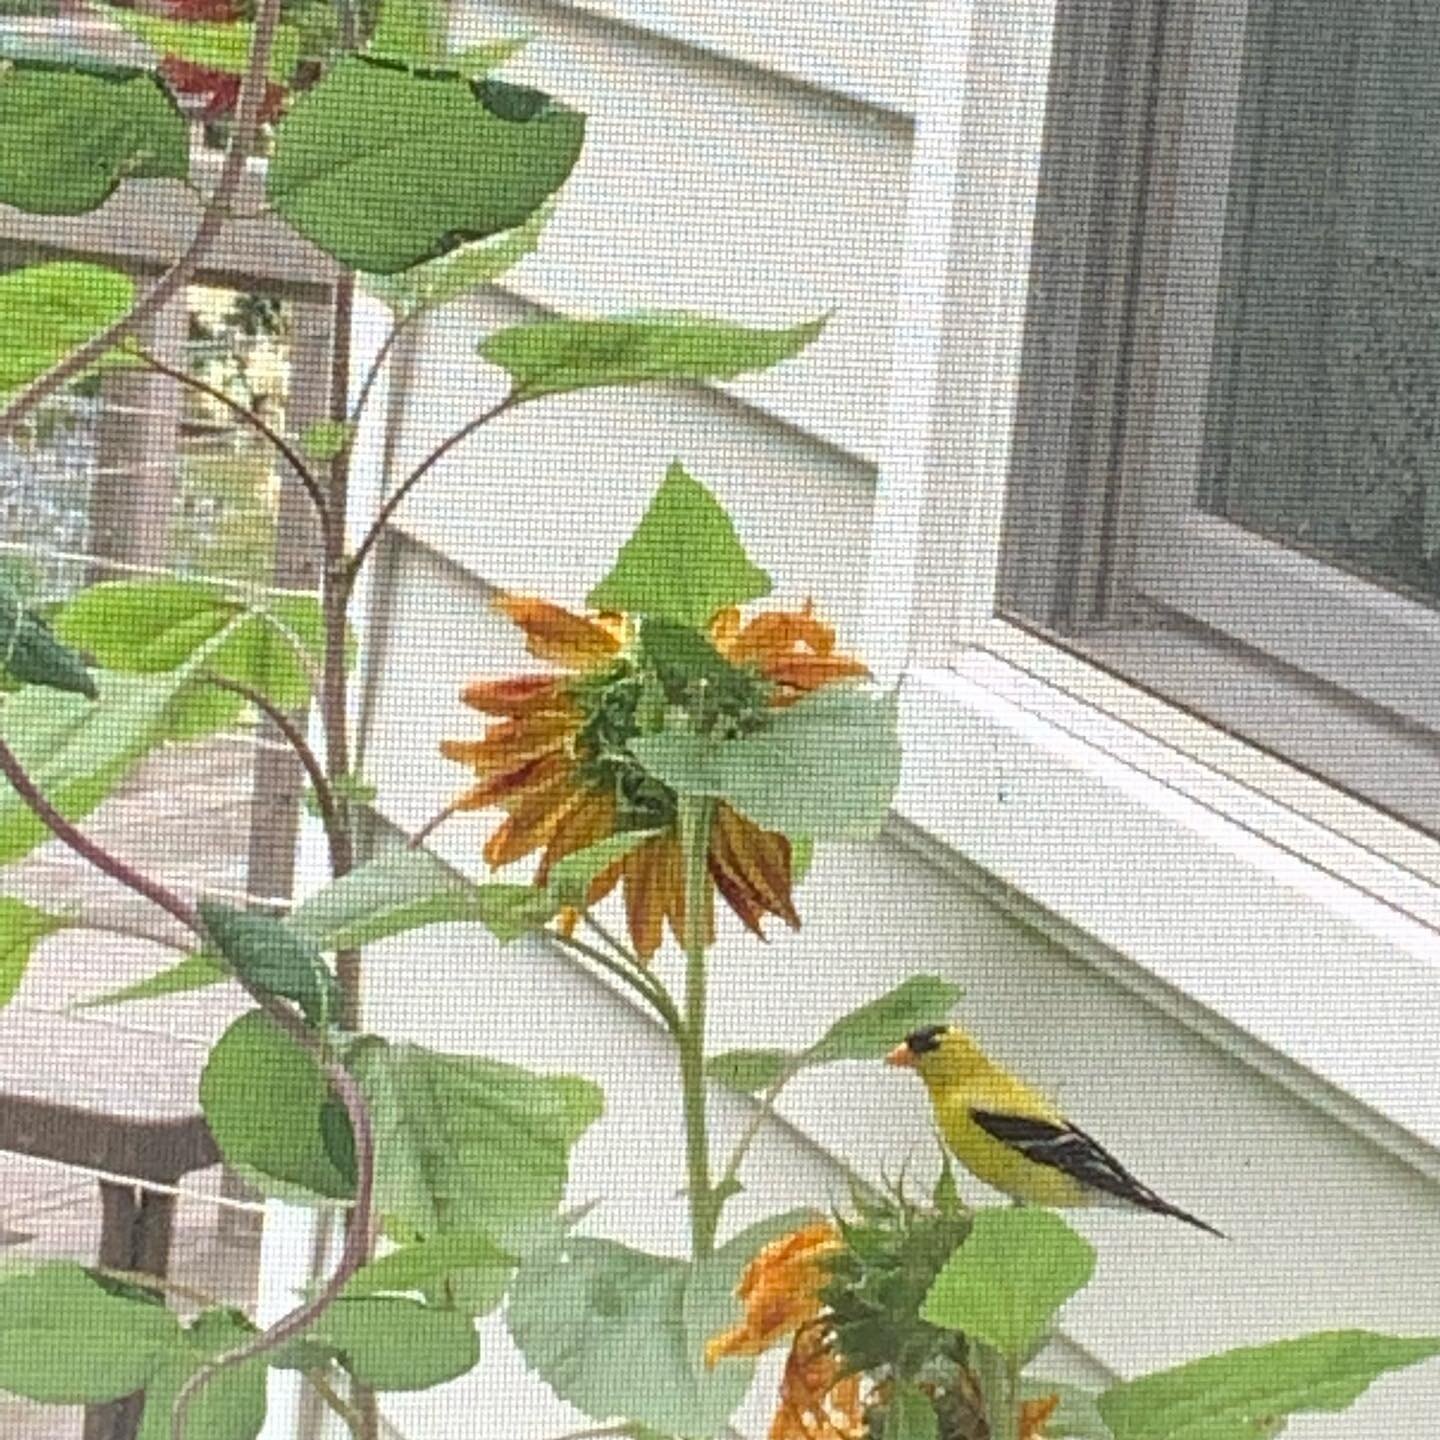 A beautiful little visitor outside my window today. Goldfinches are said to be a sign of good things to come! 🌻
.
.
.
.
.
.
.
.
#goldfinch
#yellowfinch
#sunflowers
#goodomen